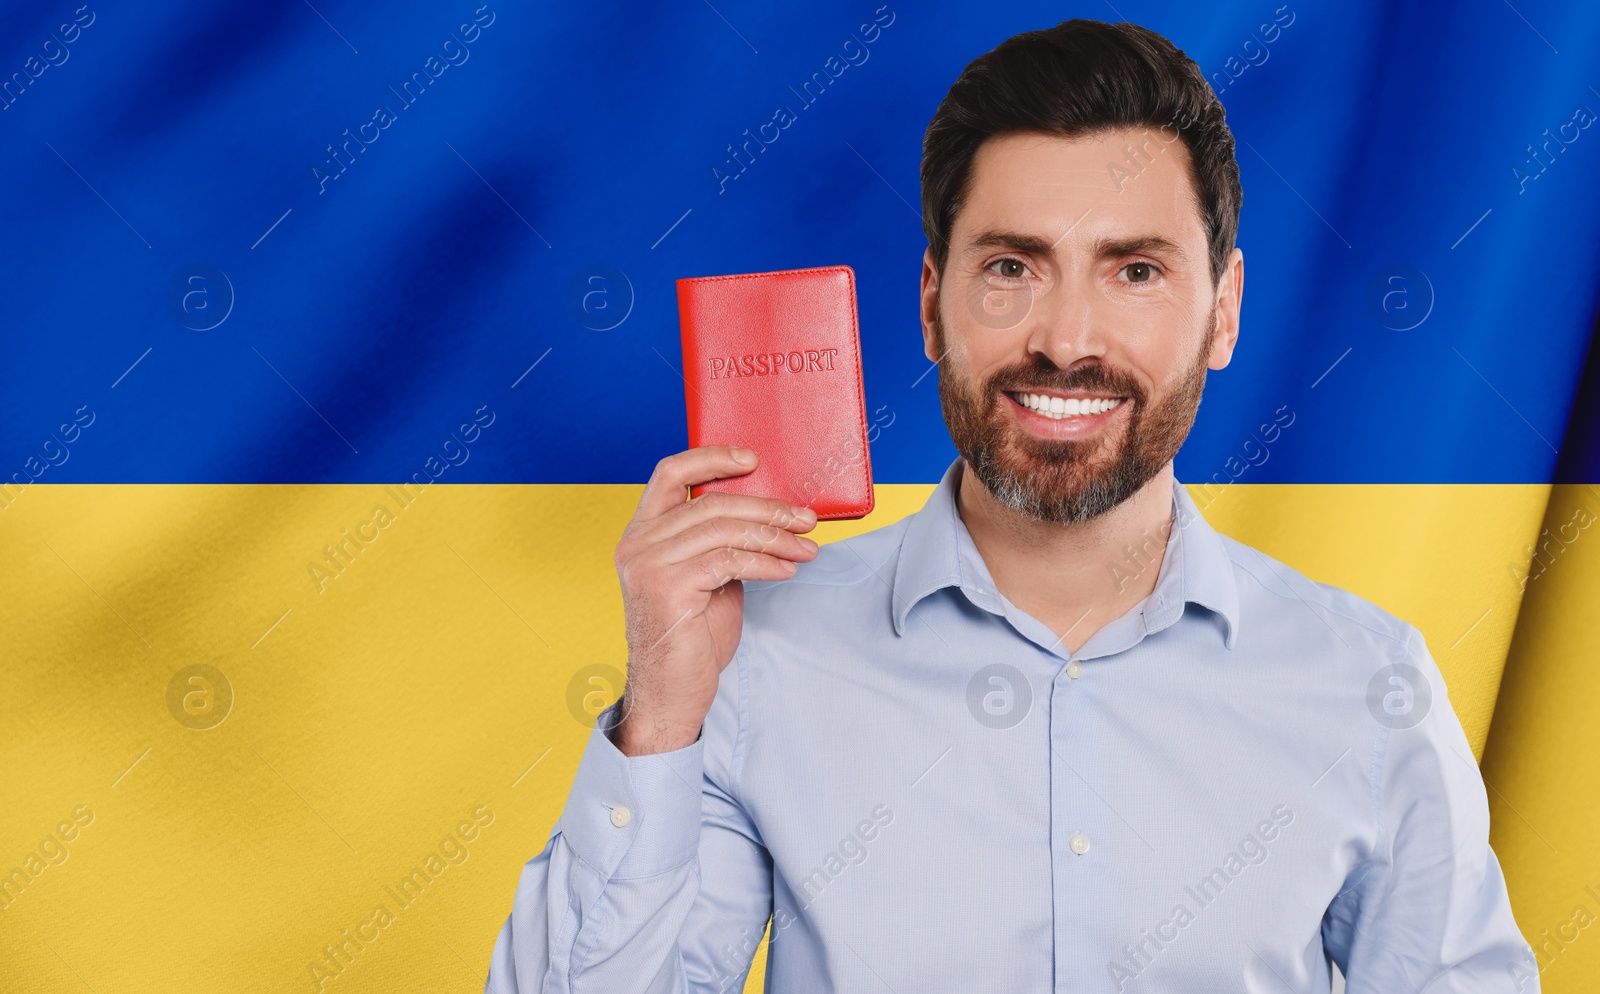 Image of Immigration. Happy man with passport against national flag of Ukraine, space for text. Banner design